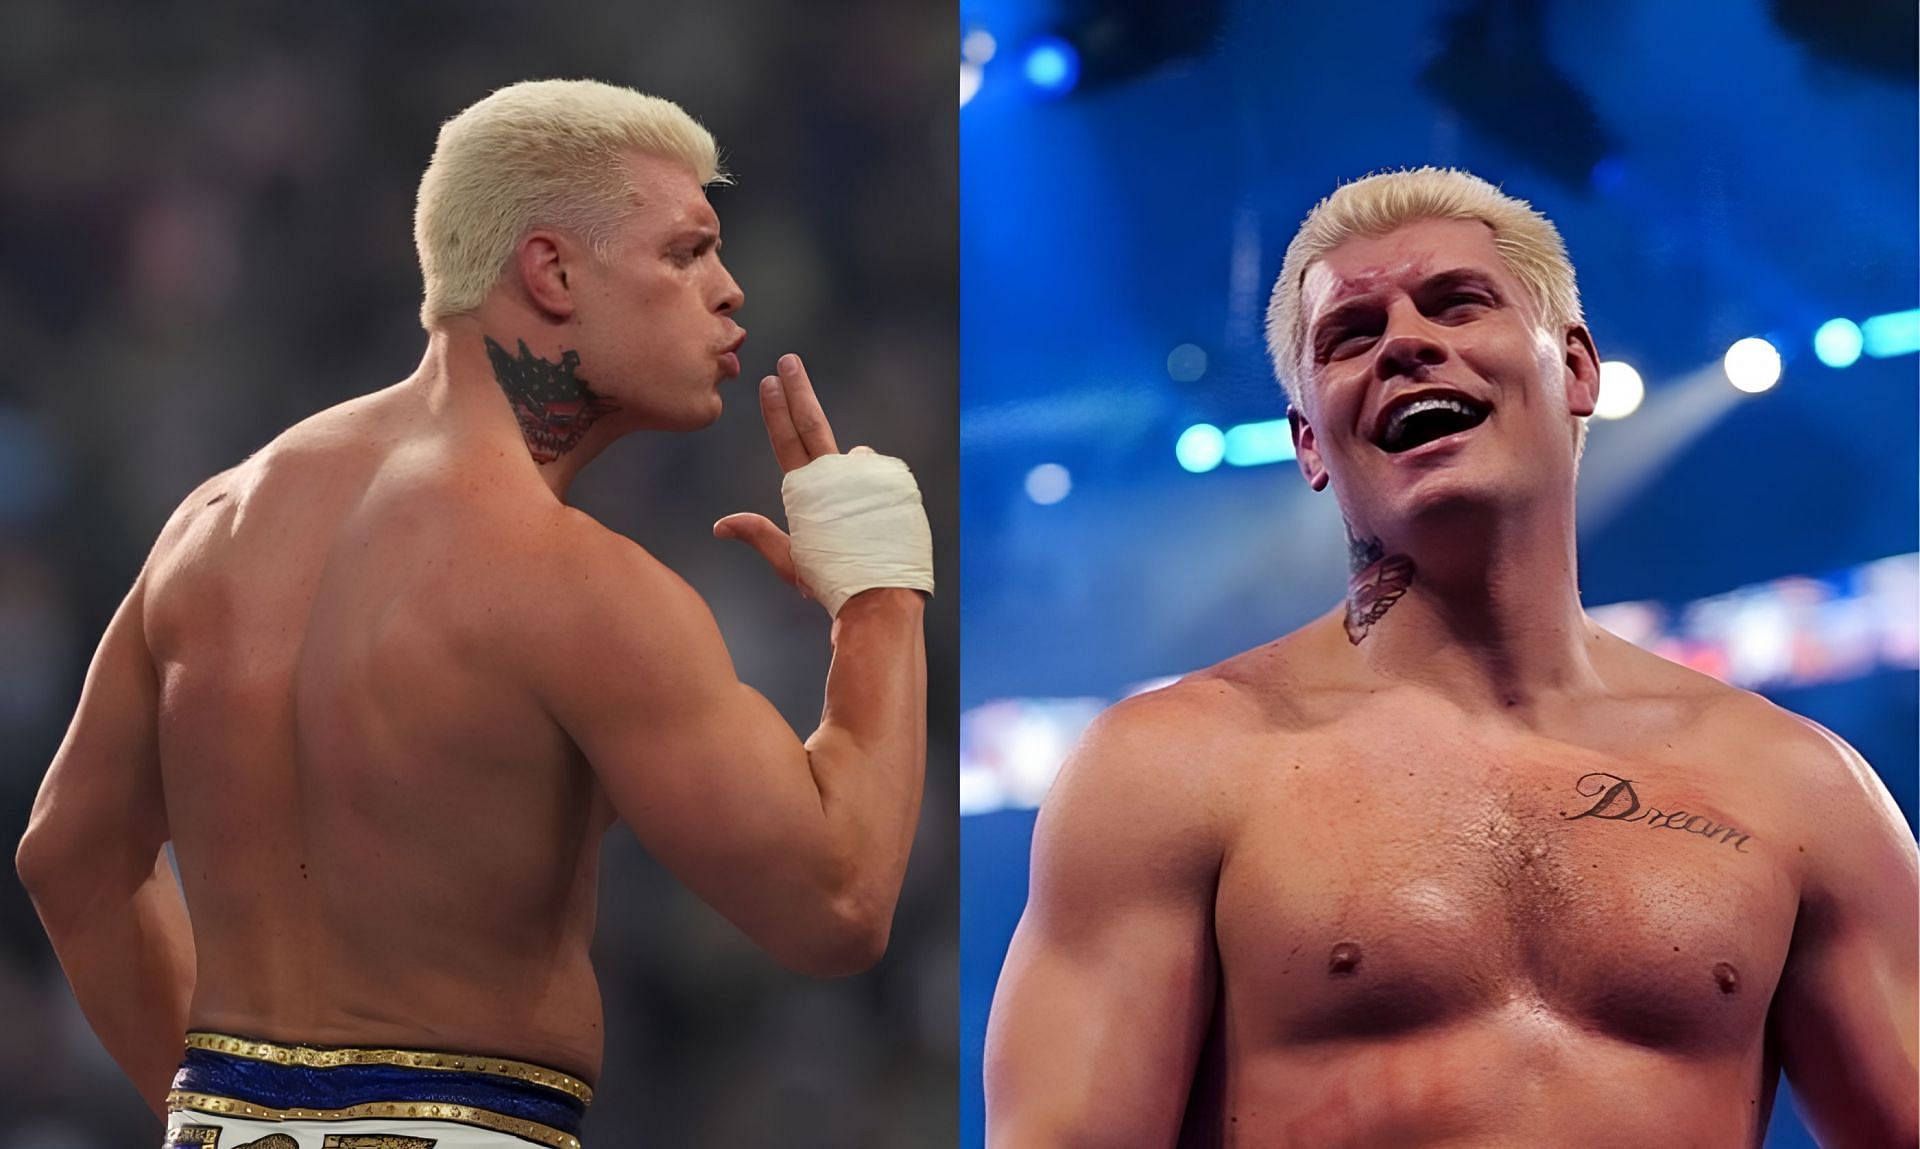 Cody Rhodes is currently drafted on RAW